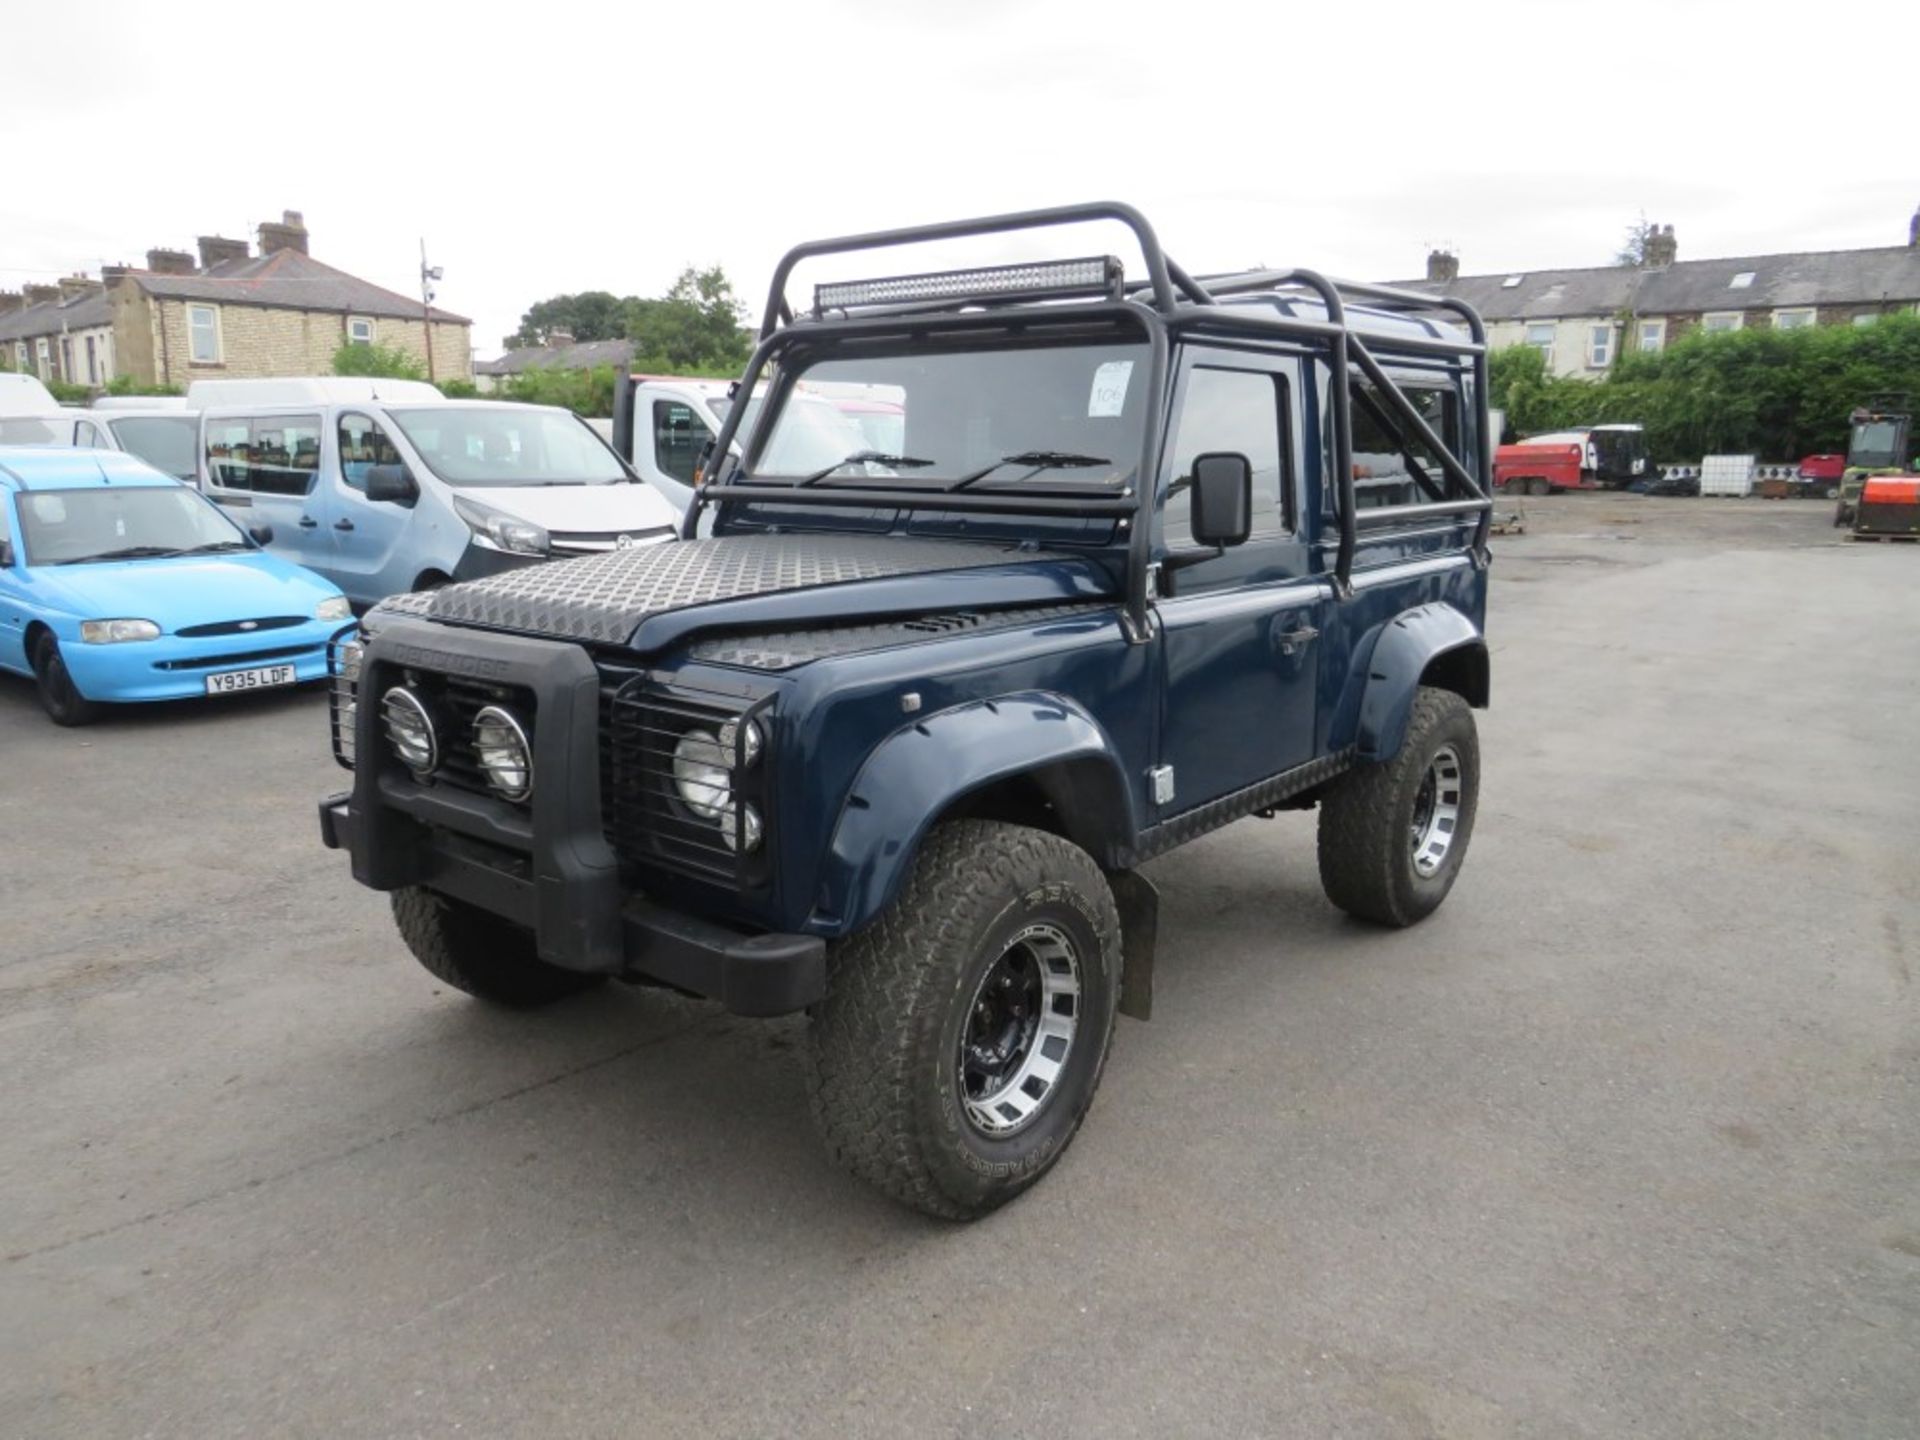 G reg LAND ROVER 90 4C SW DT DIESEL 4 X 4, NEW GLAV CHASSIS, 300 TDI ENGINE, 200 GEARBOX, NEW DOORS - Image 2 of 6